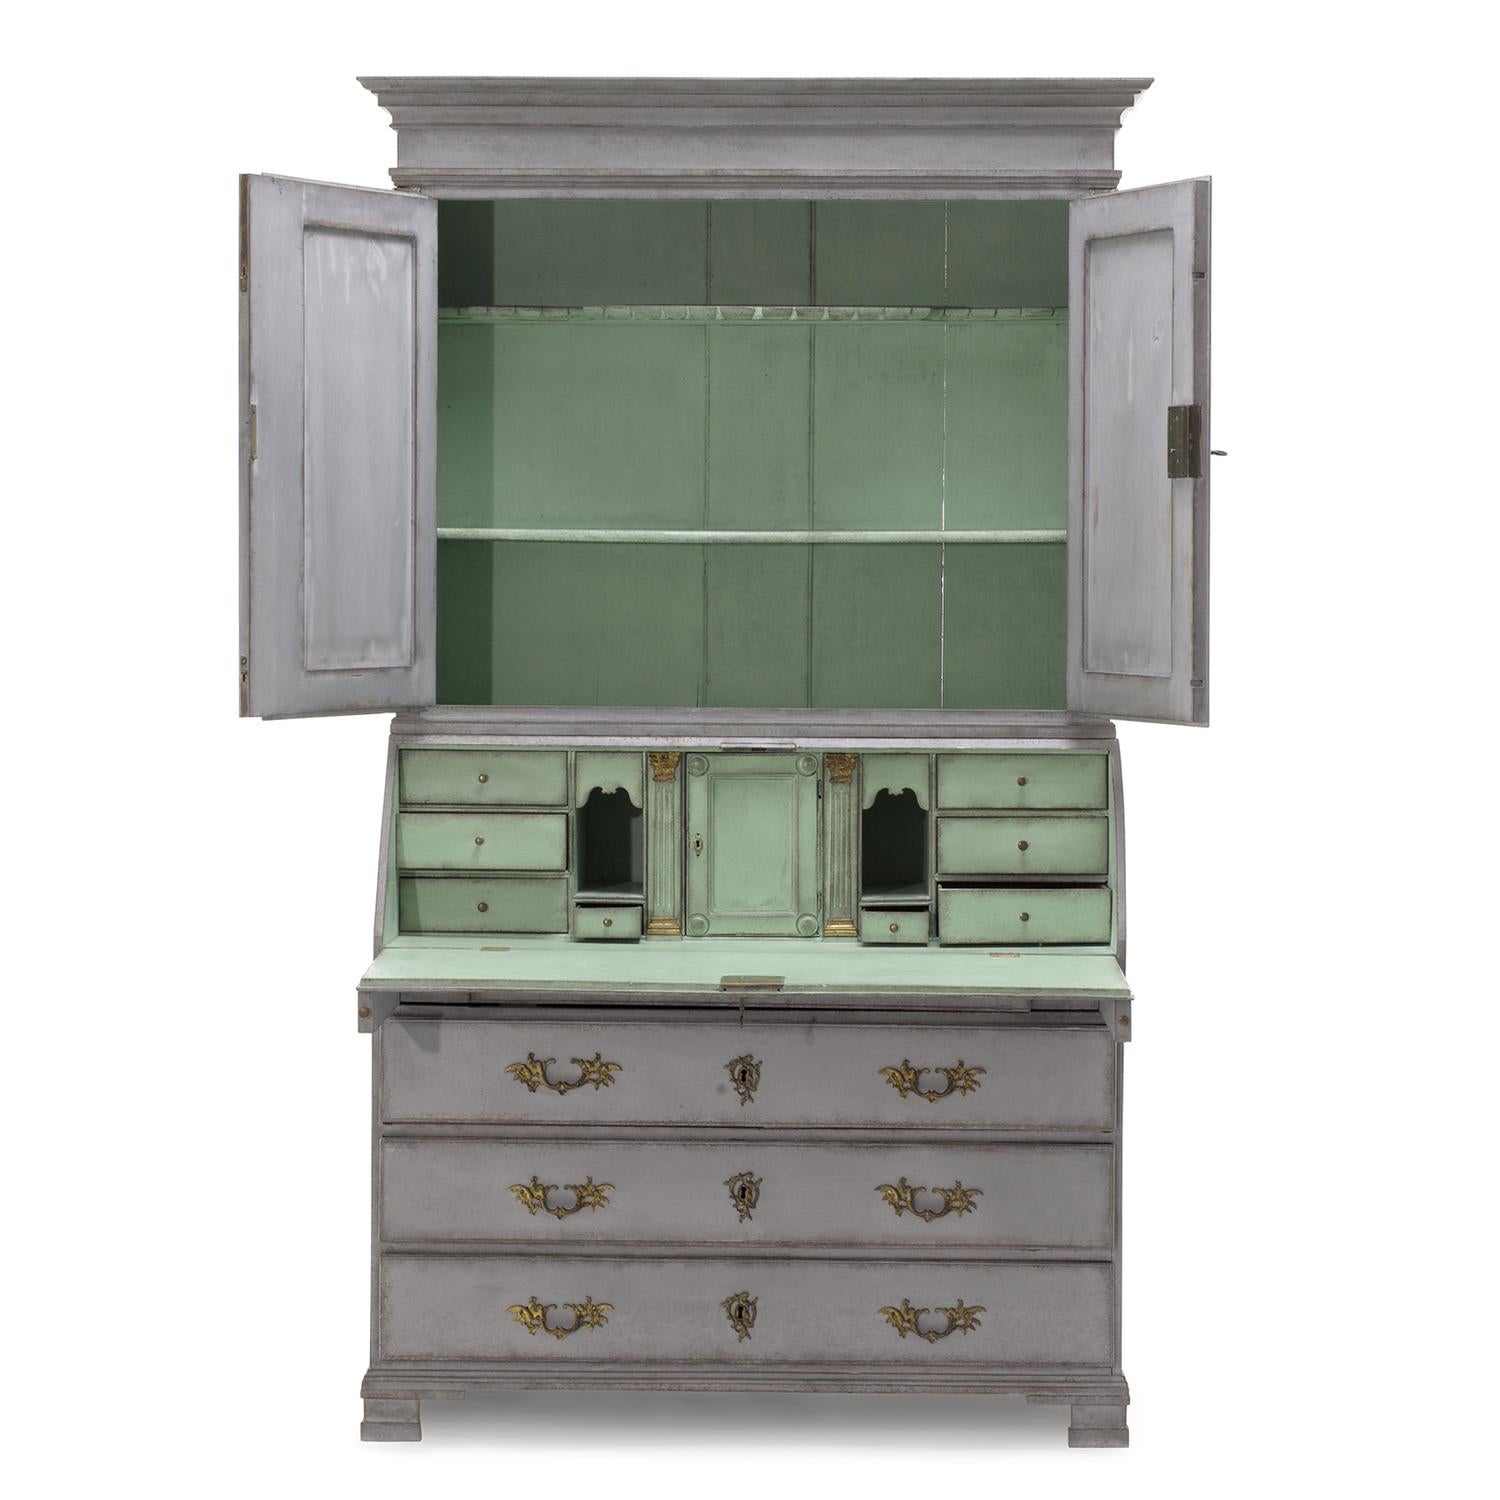 A 18th - 19th Century, dark-grey antique Swedish Gustavian two part bureau with a writing flap made of hand crafted painted pinewood, in good condition. The Scandinavian secretaire is composed with two upper doors, four large drawers and many small